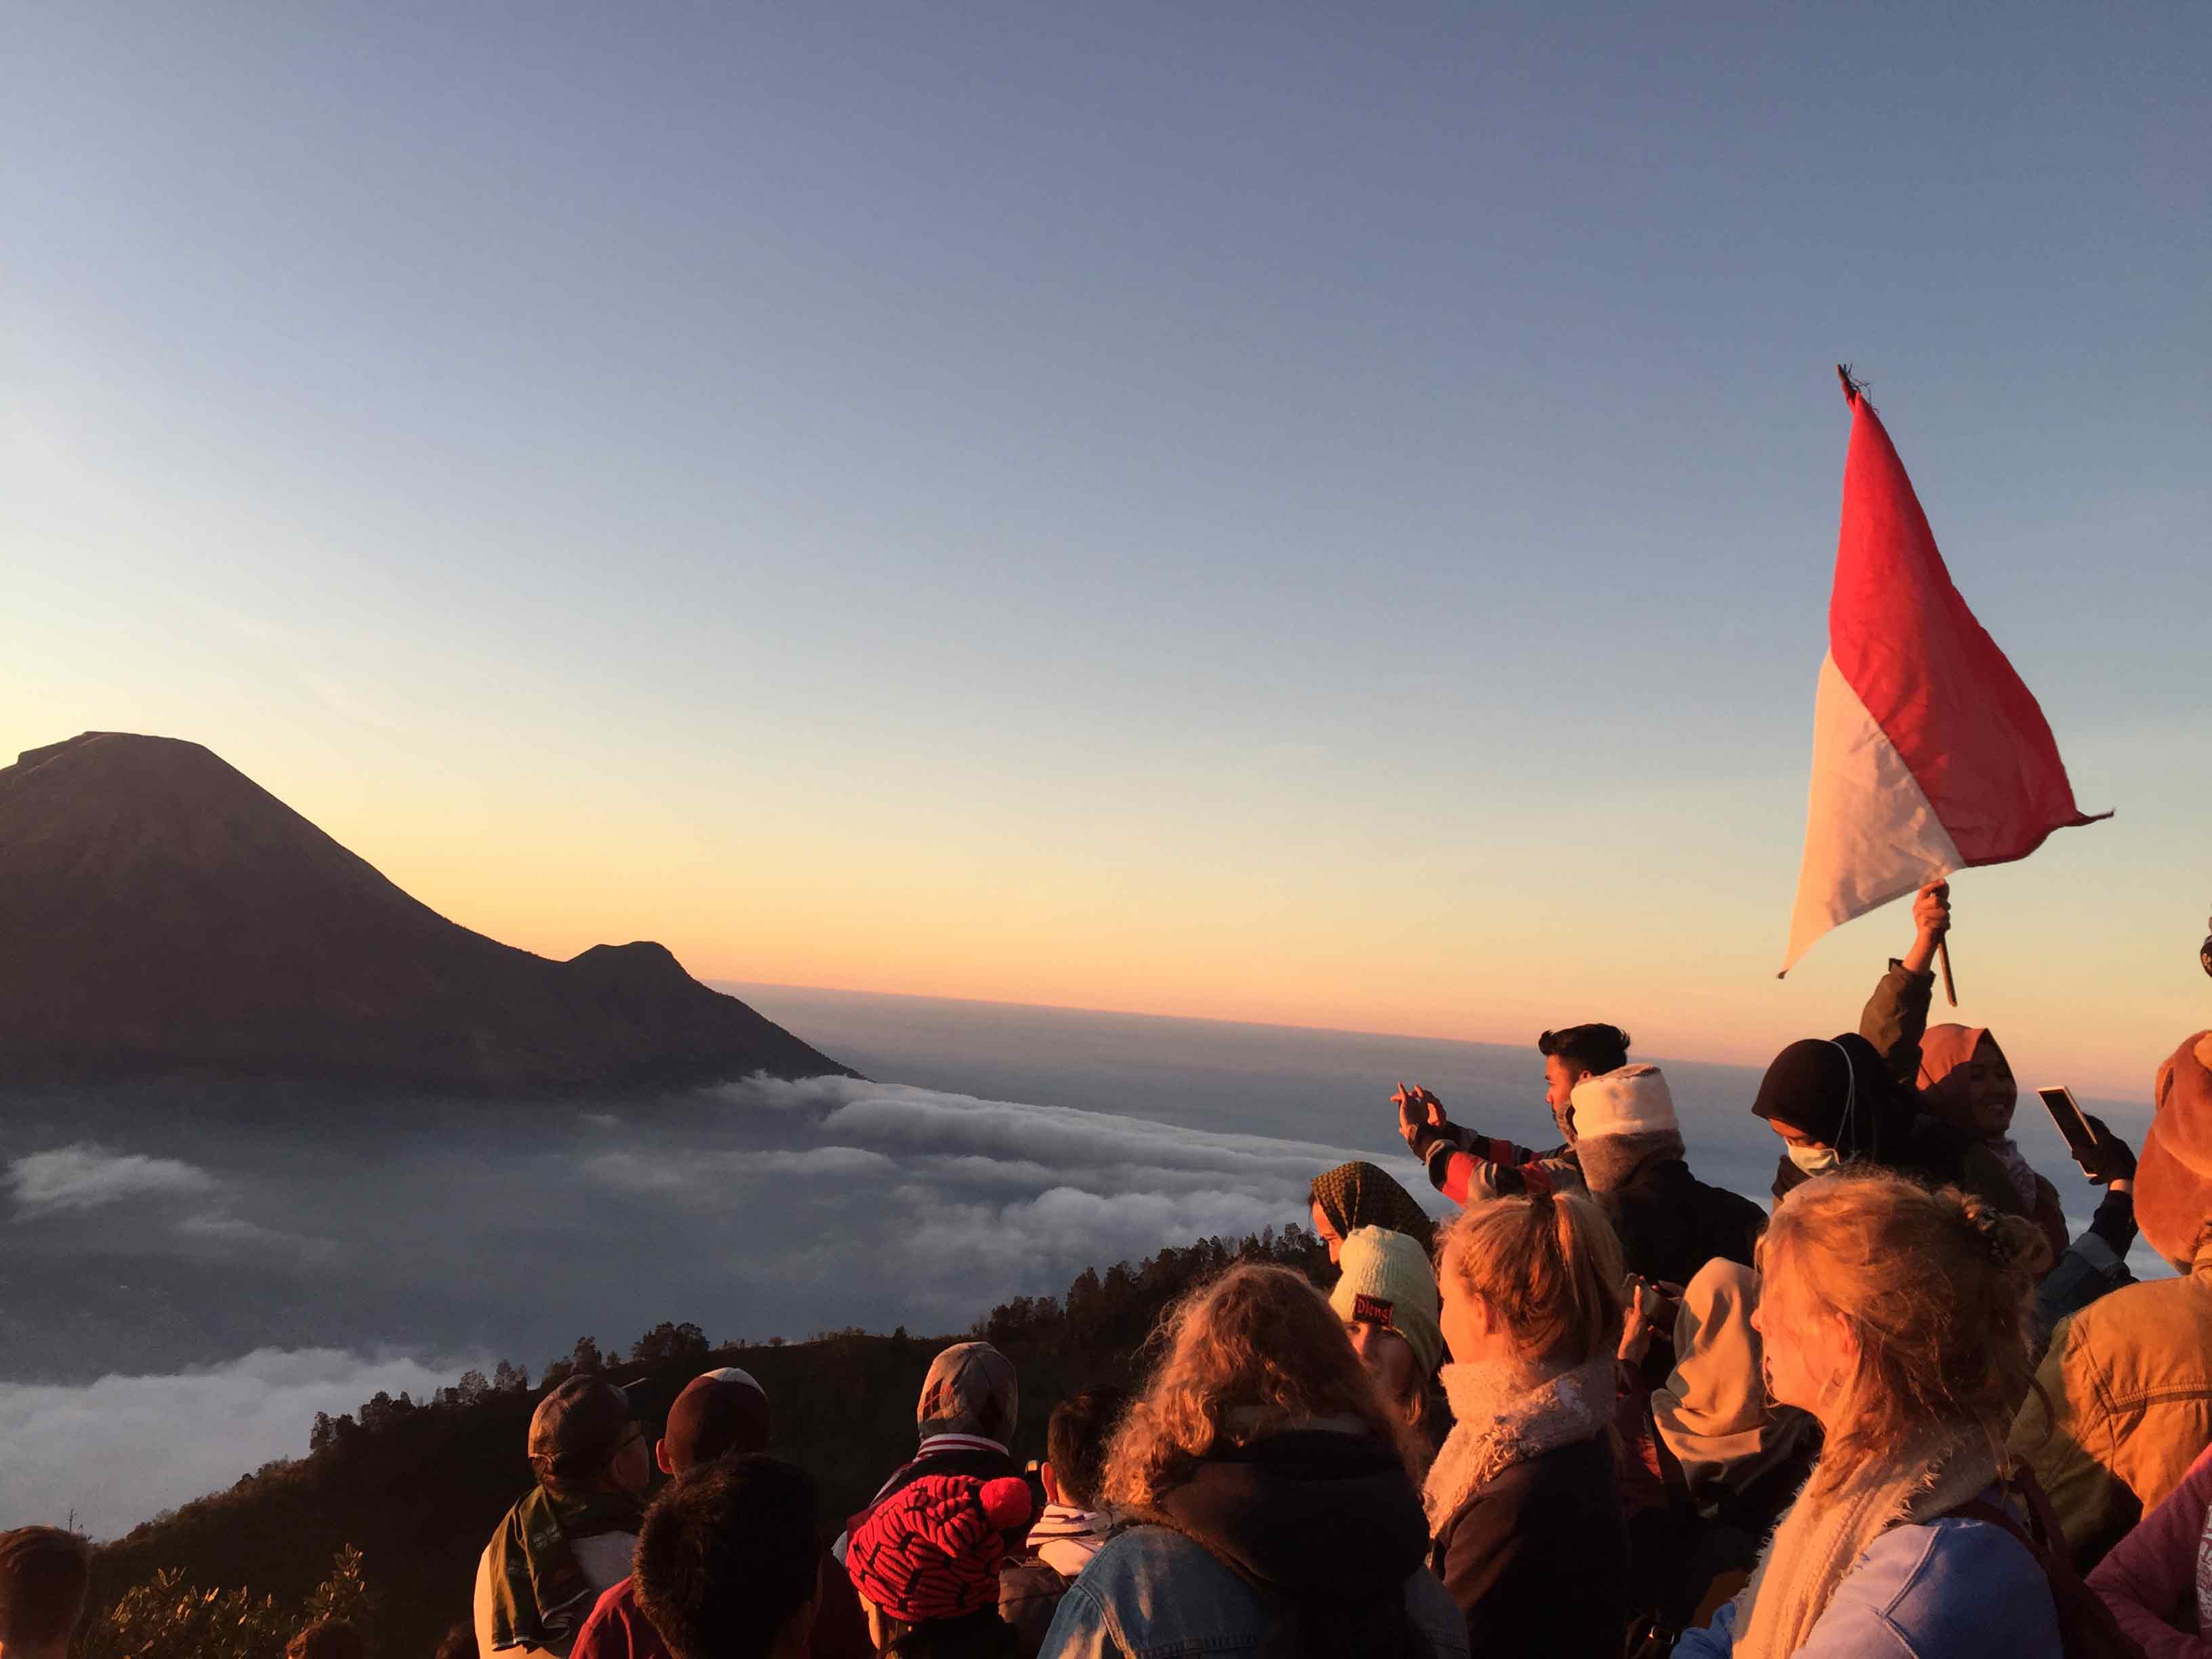 Sunrise on Indonesian Independence Day. We hiked up the mountain before the sun rose and hundreds of people sang the Indonesian national anthem'